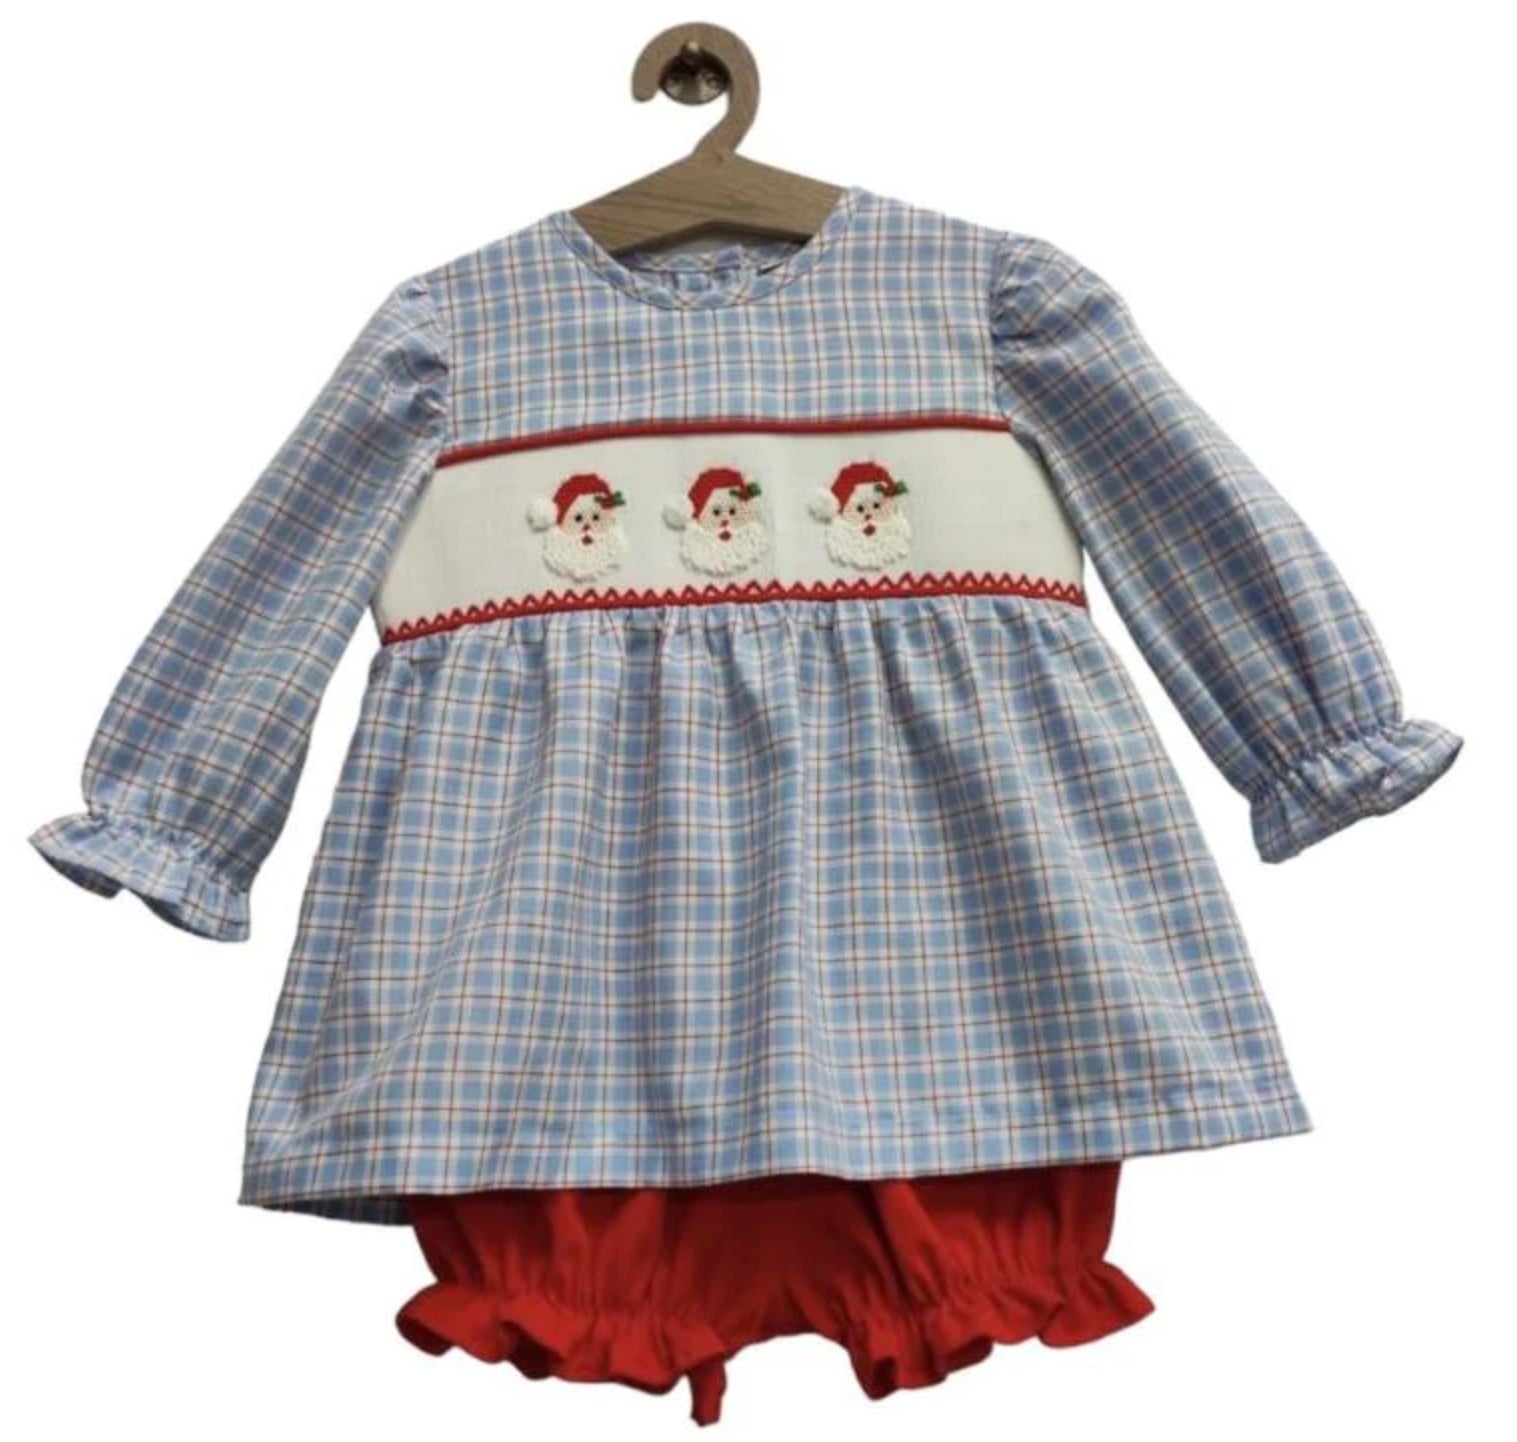 A baby girl's Santa Smock Bloomer Set with ruffled ruffles by Chickie Collective.